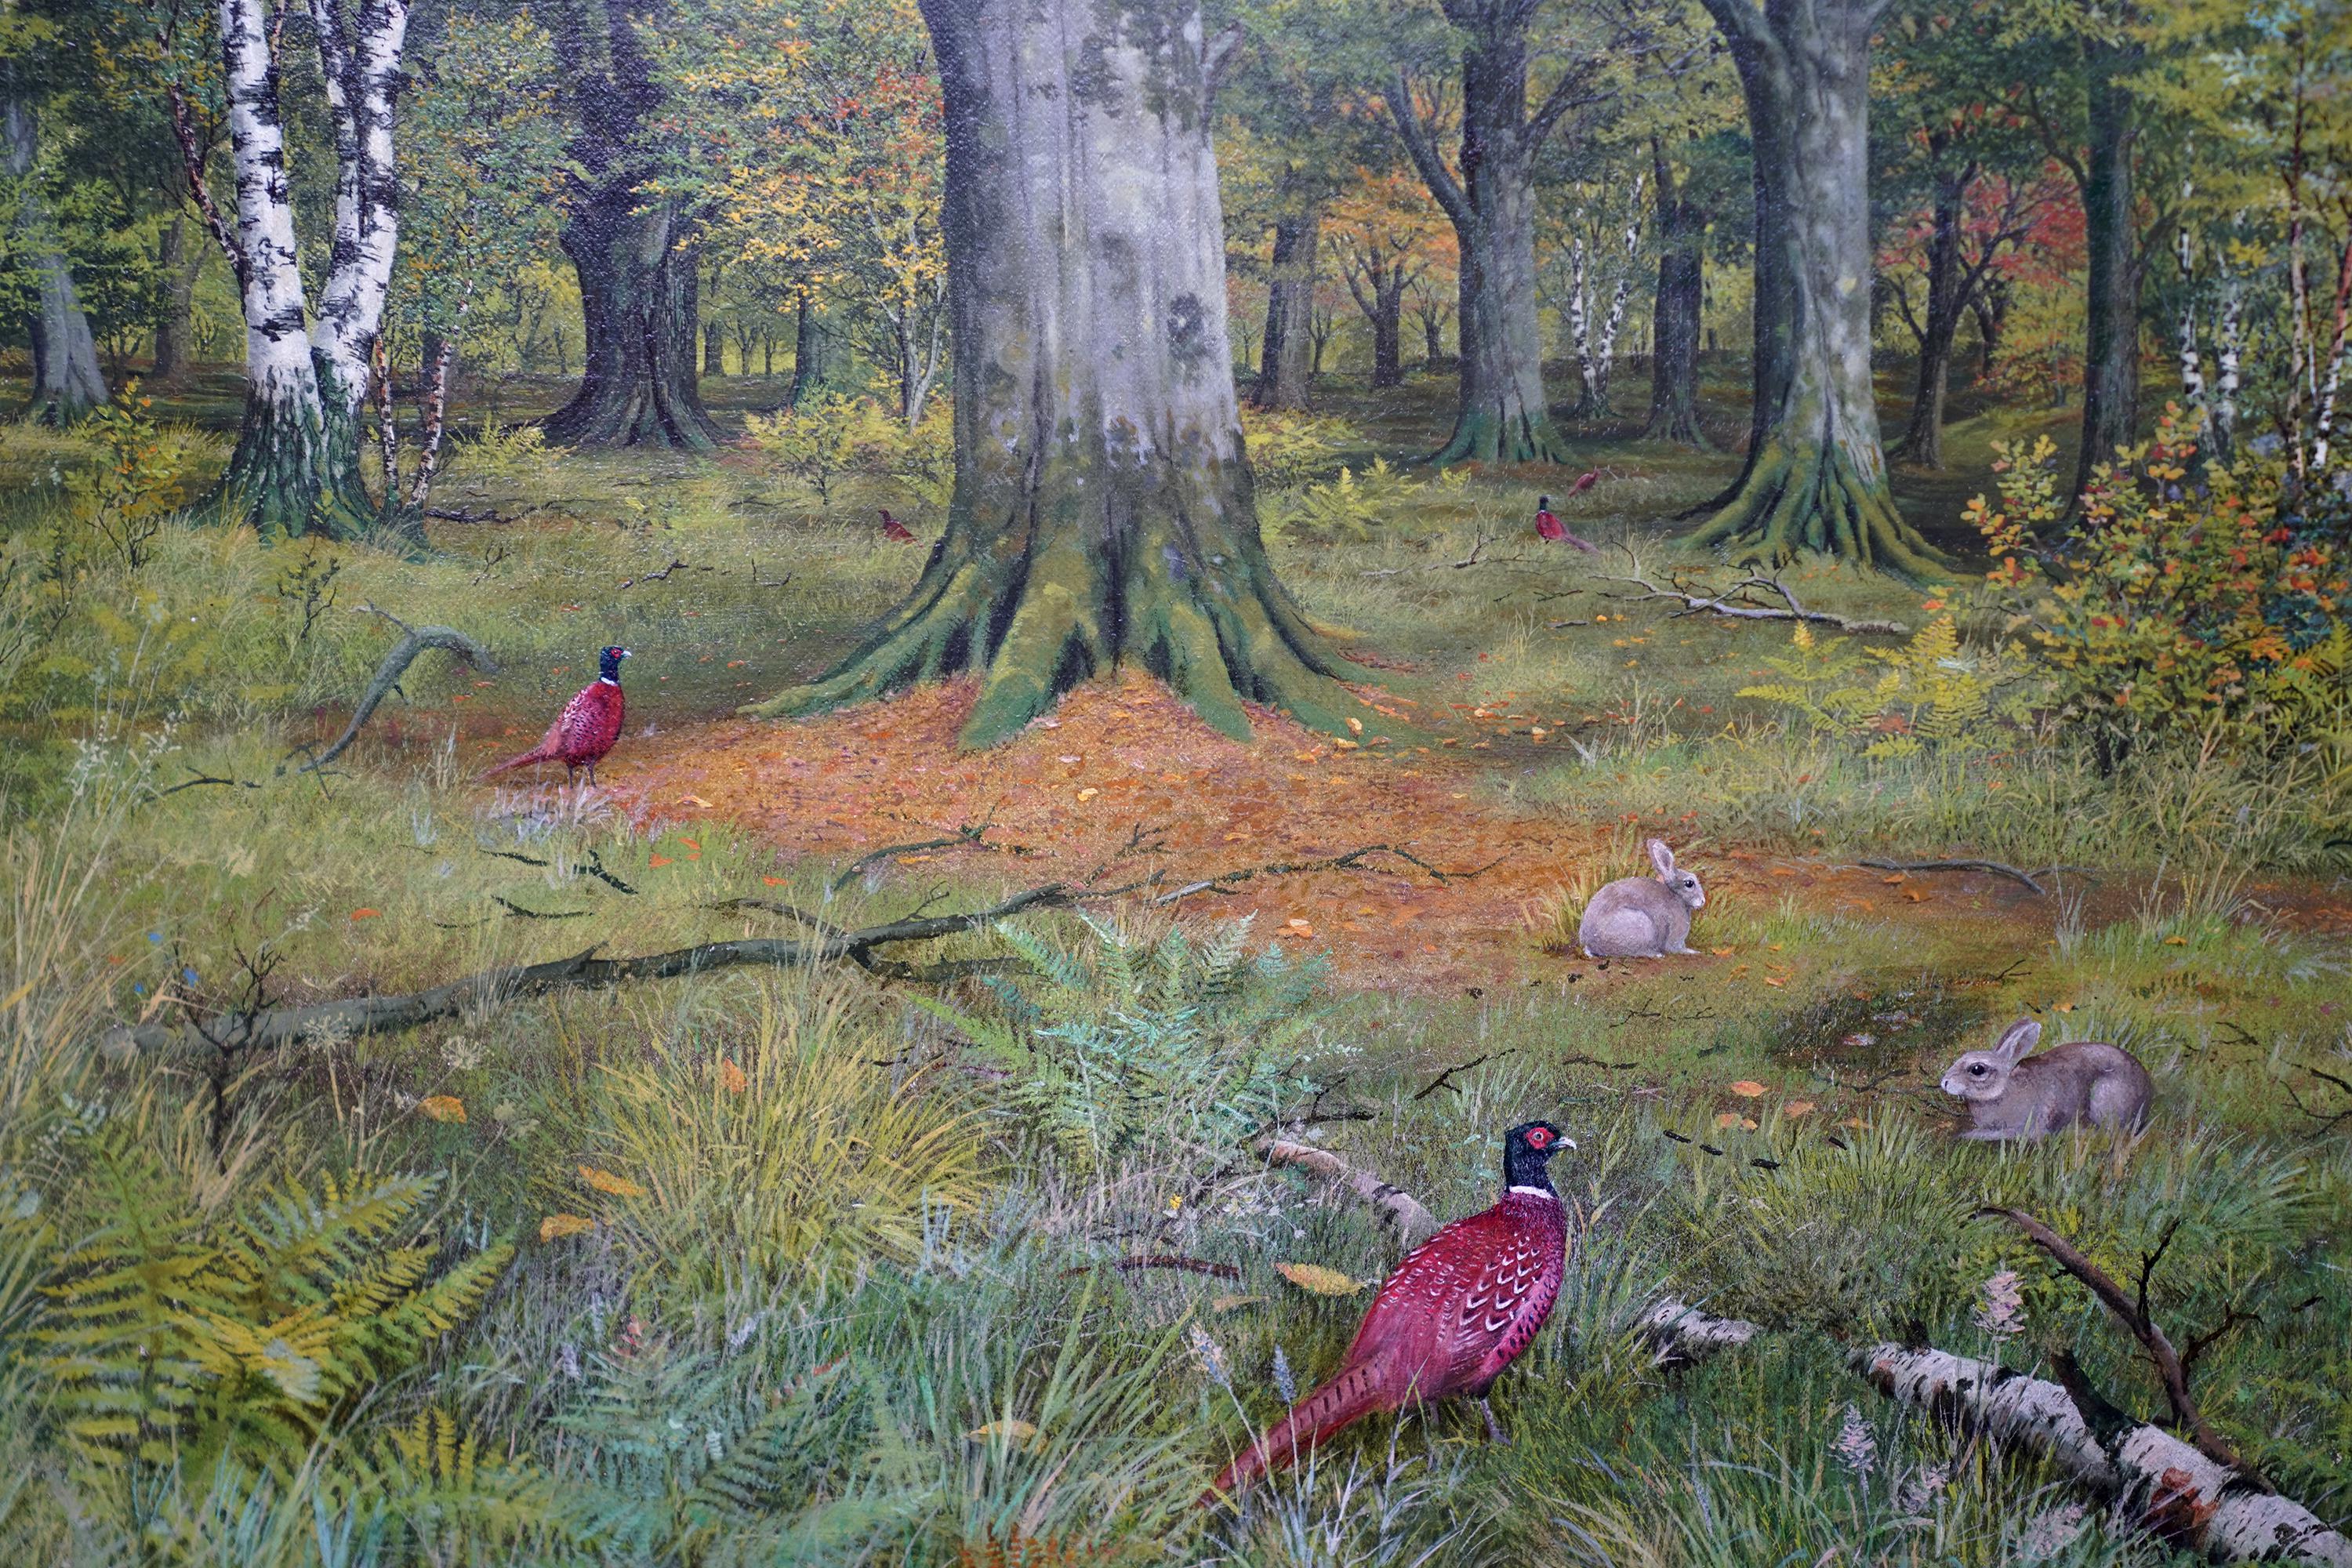 This lovely Scottish Victorian woodland landscape oil painting is by noted Scottish artist John Reid. Painted and exhibited in 1880 at the Royal Scottish Academy, the location is Morden or Moredun Wood in Edinburgh. A number of pheasants plus two